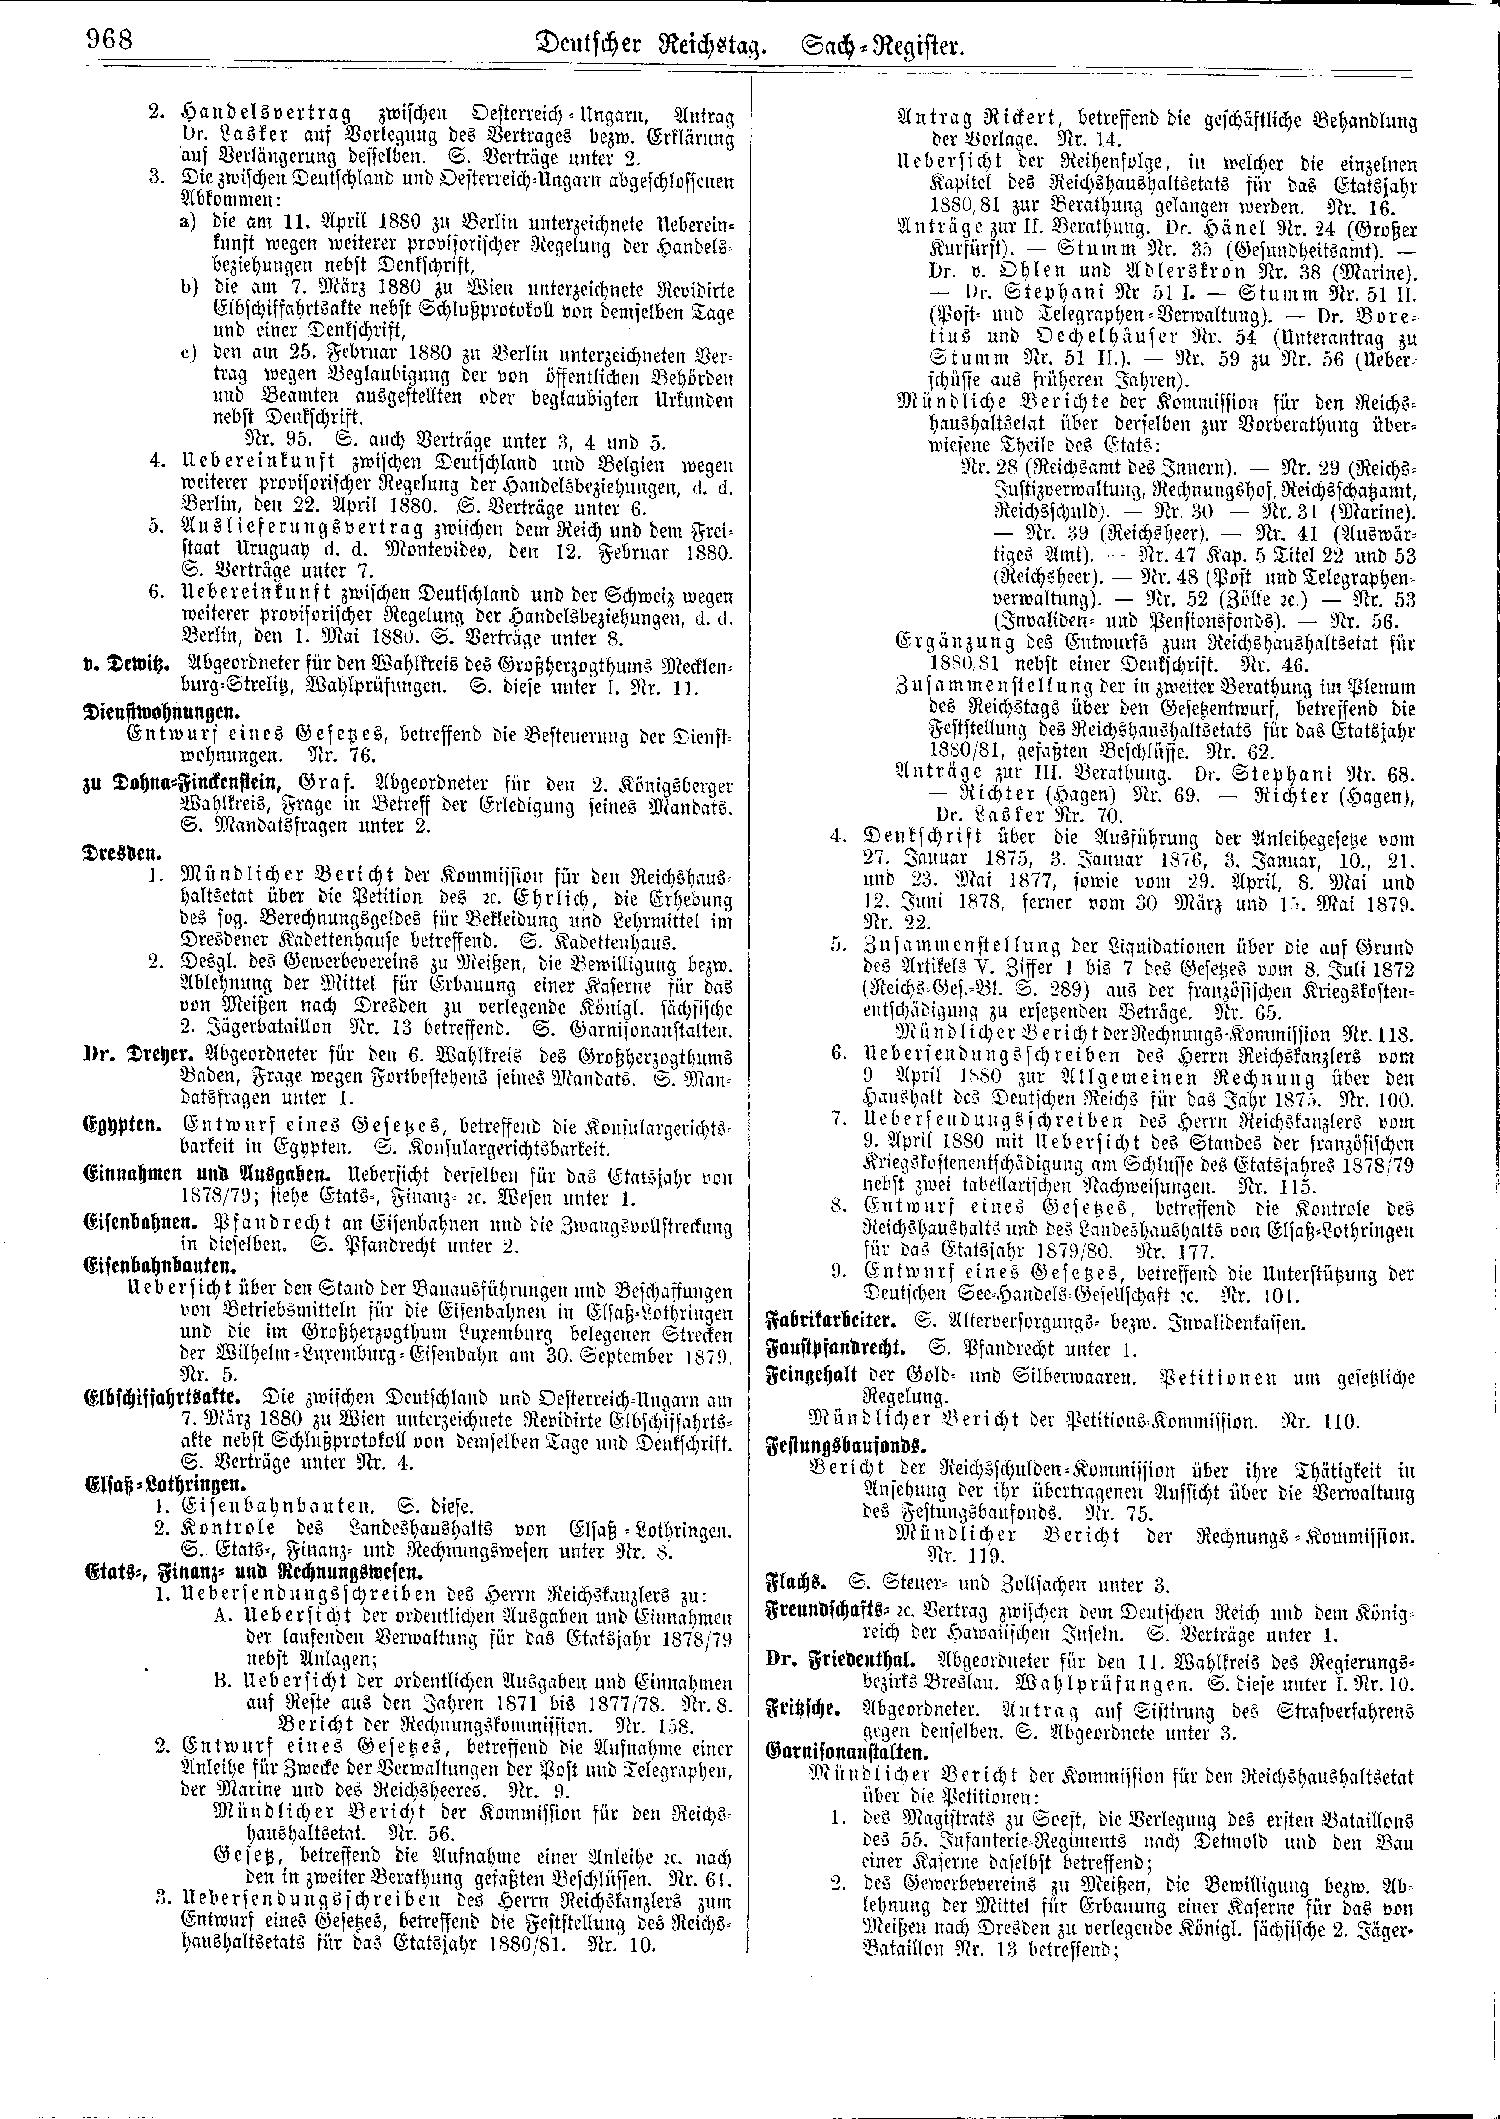 Scan of page 968